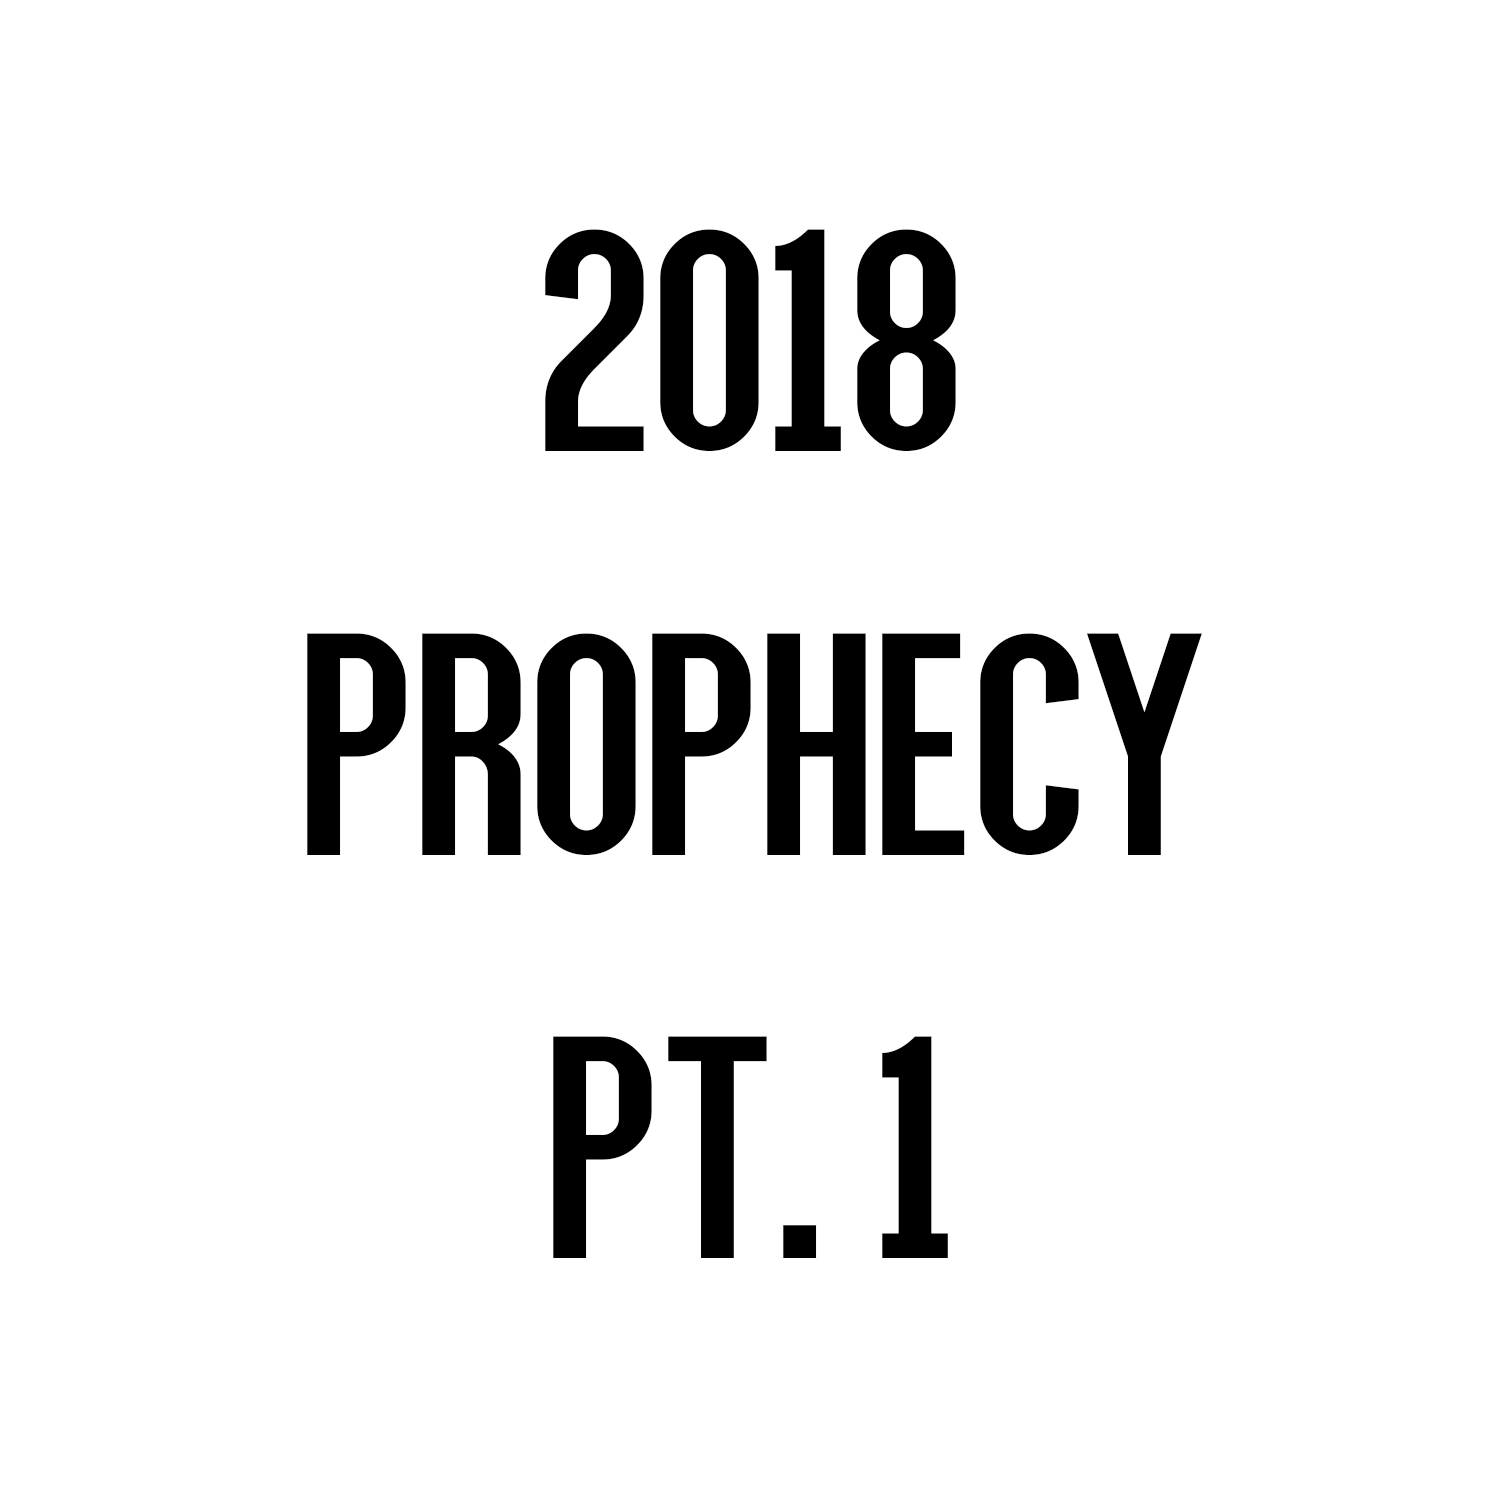 Intro to Johnny's Prophetic Word for the New Year | Part 1 of 4